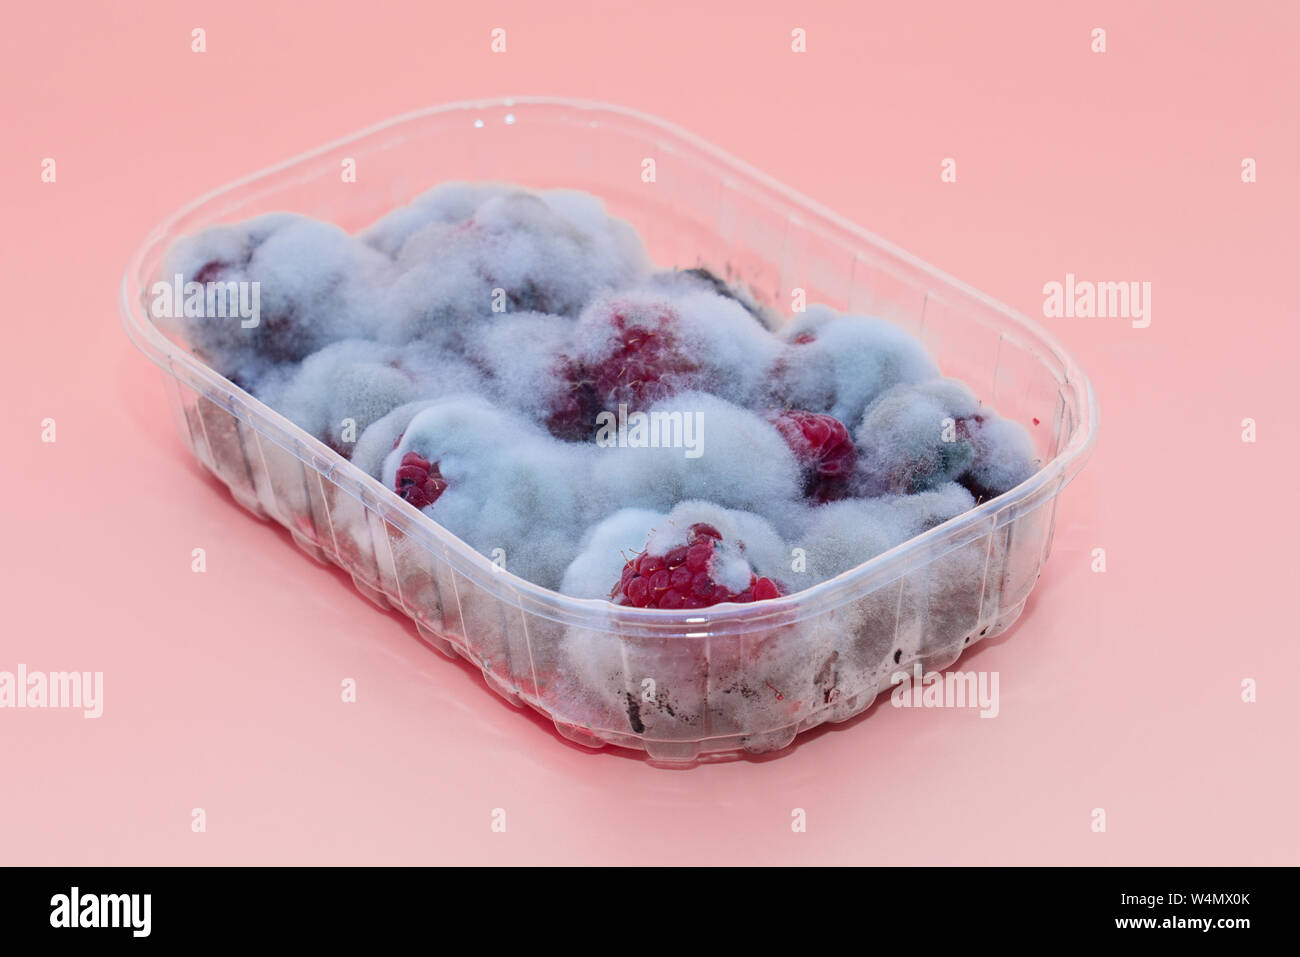 Closeup of rotten moldy raspberry in plastic box isolated on pink background. Damaged ripe berry with Botrytis Cinerea mold Stock Photo